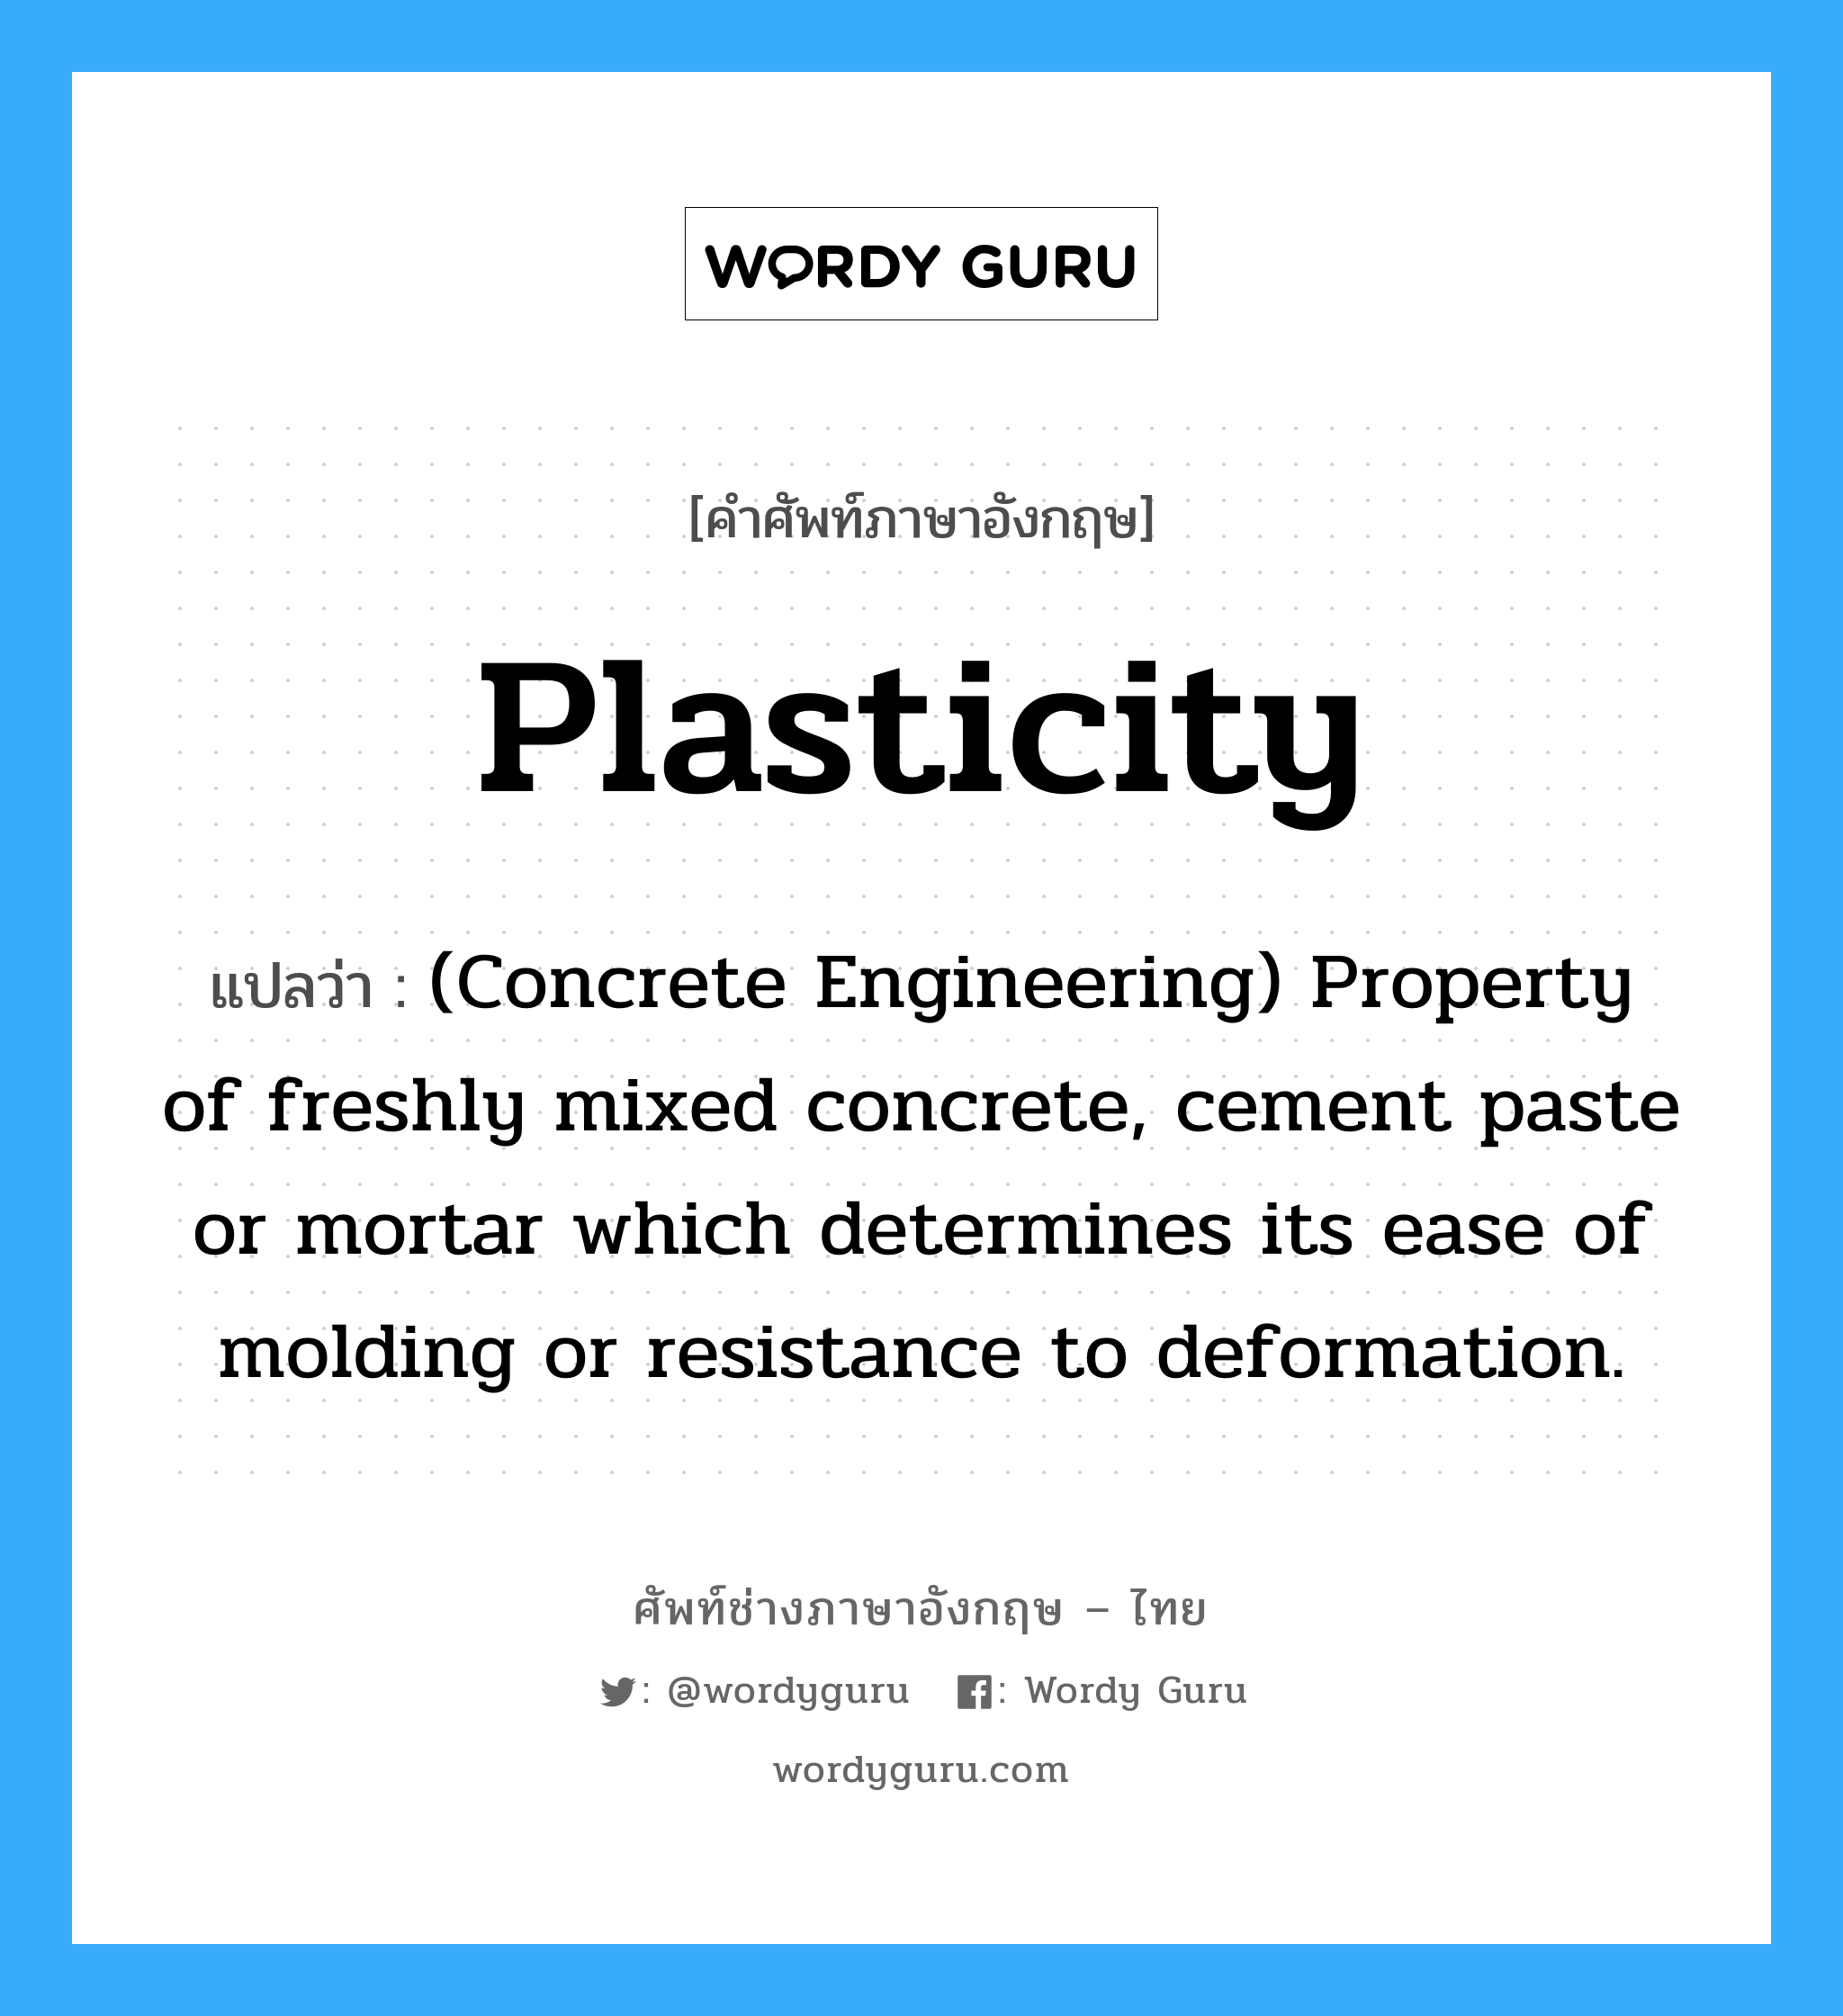 Plasticity แปลว่า?, คำศัพท์ช่างภาษาอังกฤษ - ไทย Plasticity คำศัพท์ภาษาอังกฤษ Plasticity แปลว่า (Concrete Engineering) Property of freshly mixed concrete, cement paste or mortar which determines its ease of molding or resistance to deformation.